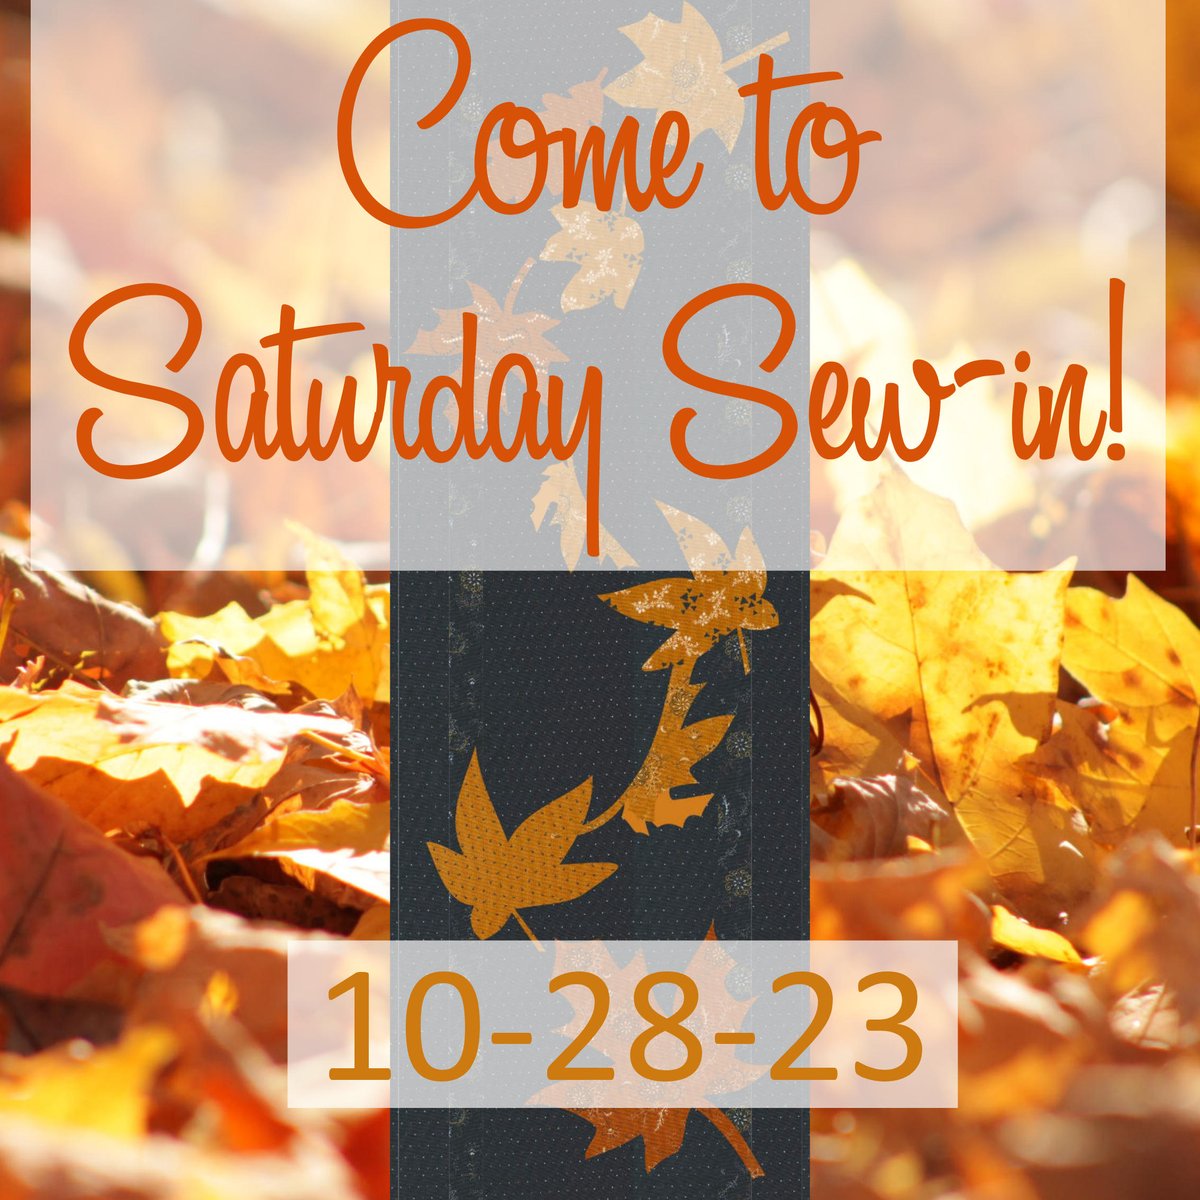 What are you working on? Today I'm not sewing but taking in the fall foliage. Come share what you're doing and make new quilting friends in my private Facebook group. ow.ly/oBye50z3dEy #inquiringquilter #saturdaysewin #saturdaysewing